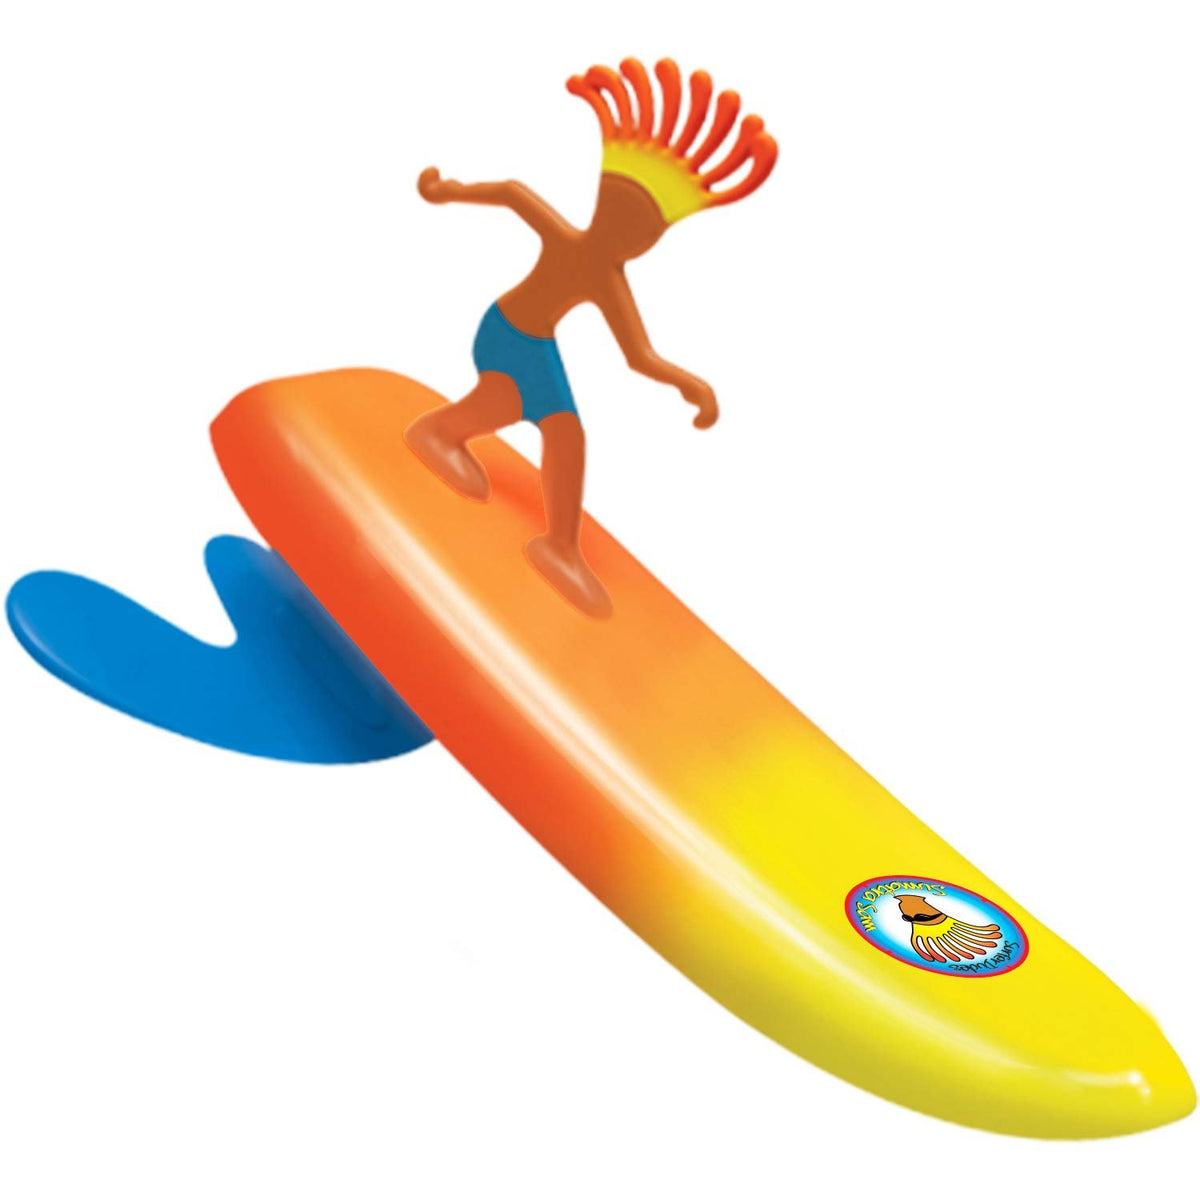 Surfer Dudes Wave Powered Mini-Surfer and Surfboard Toy - Sumatra Sam